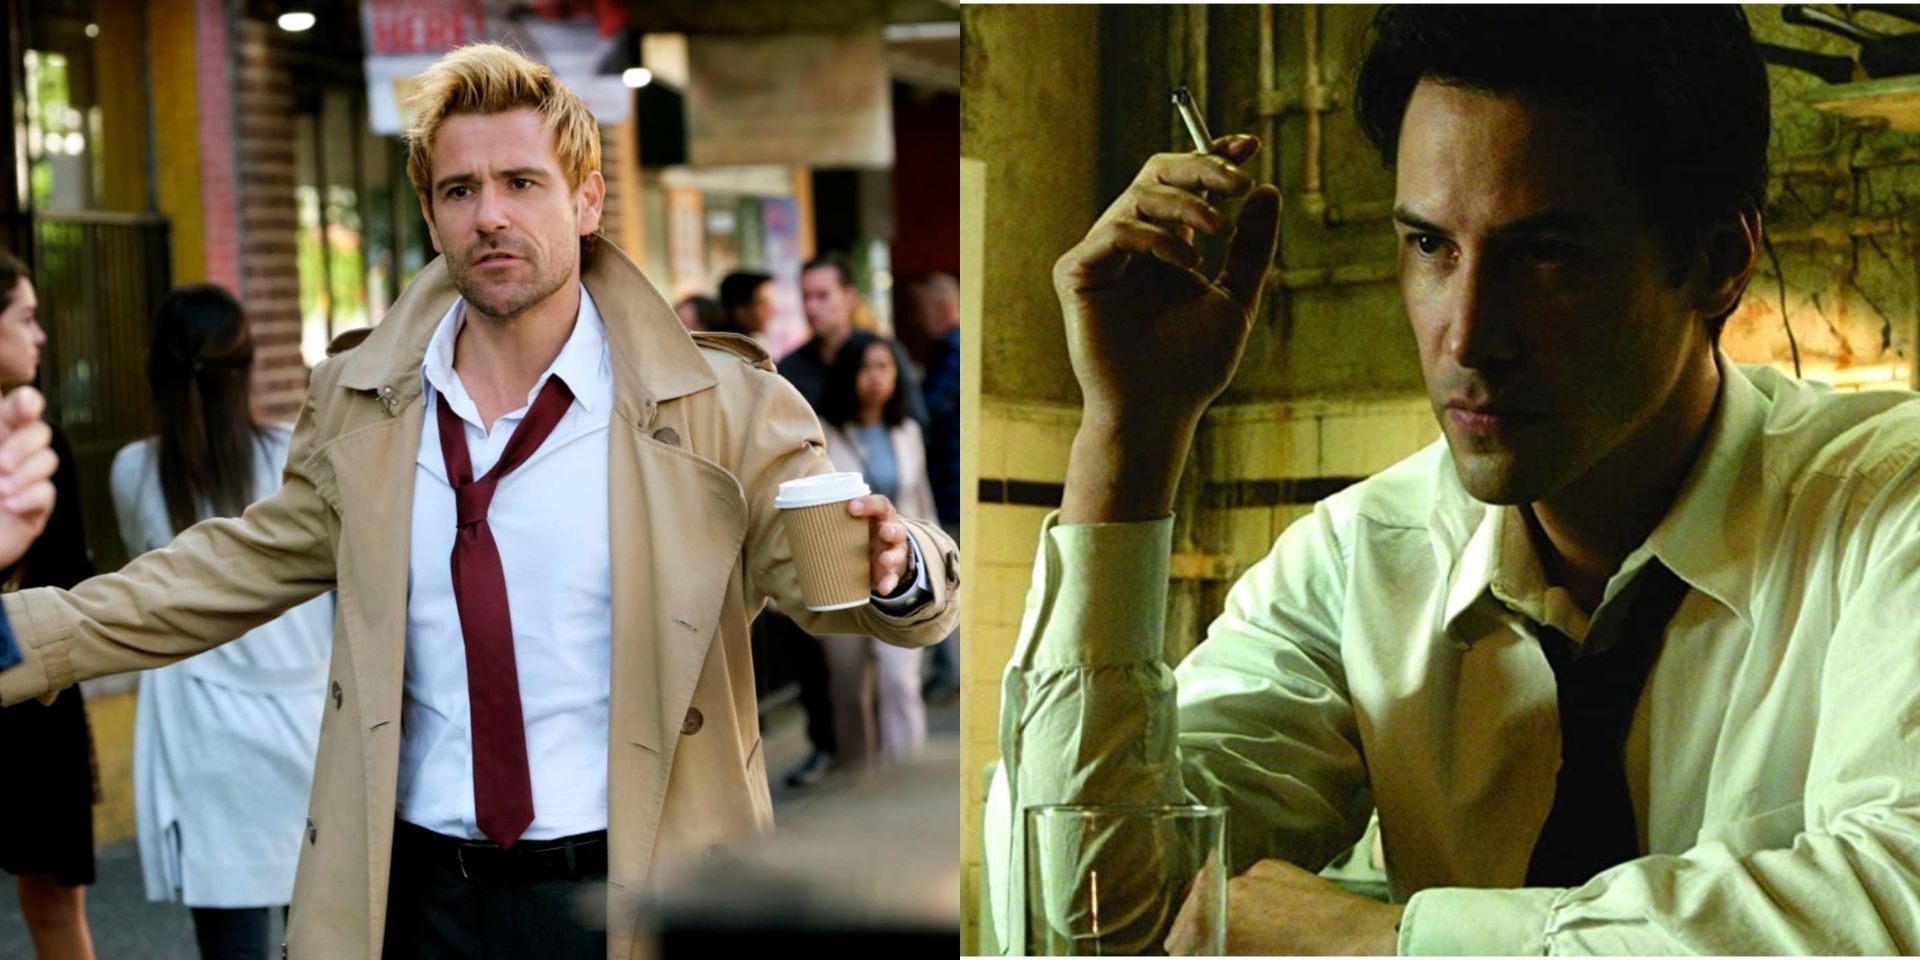 John Constantine in a movie and NBC series